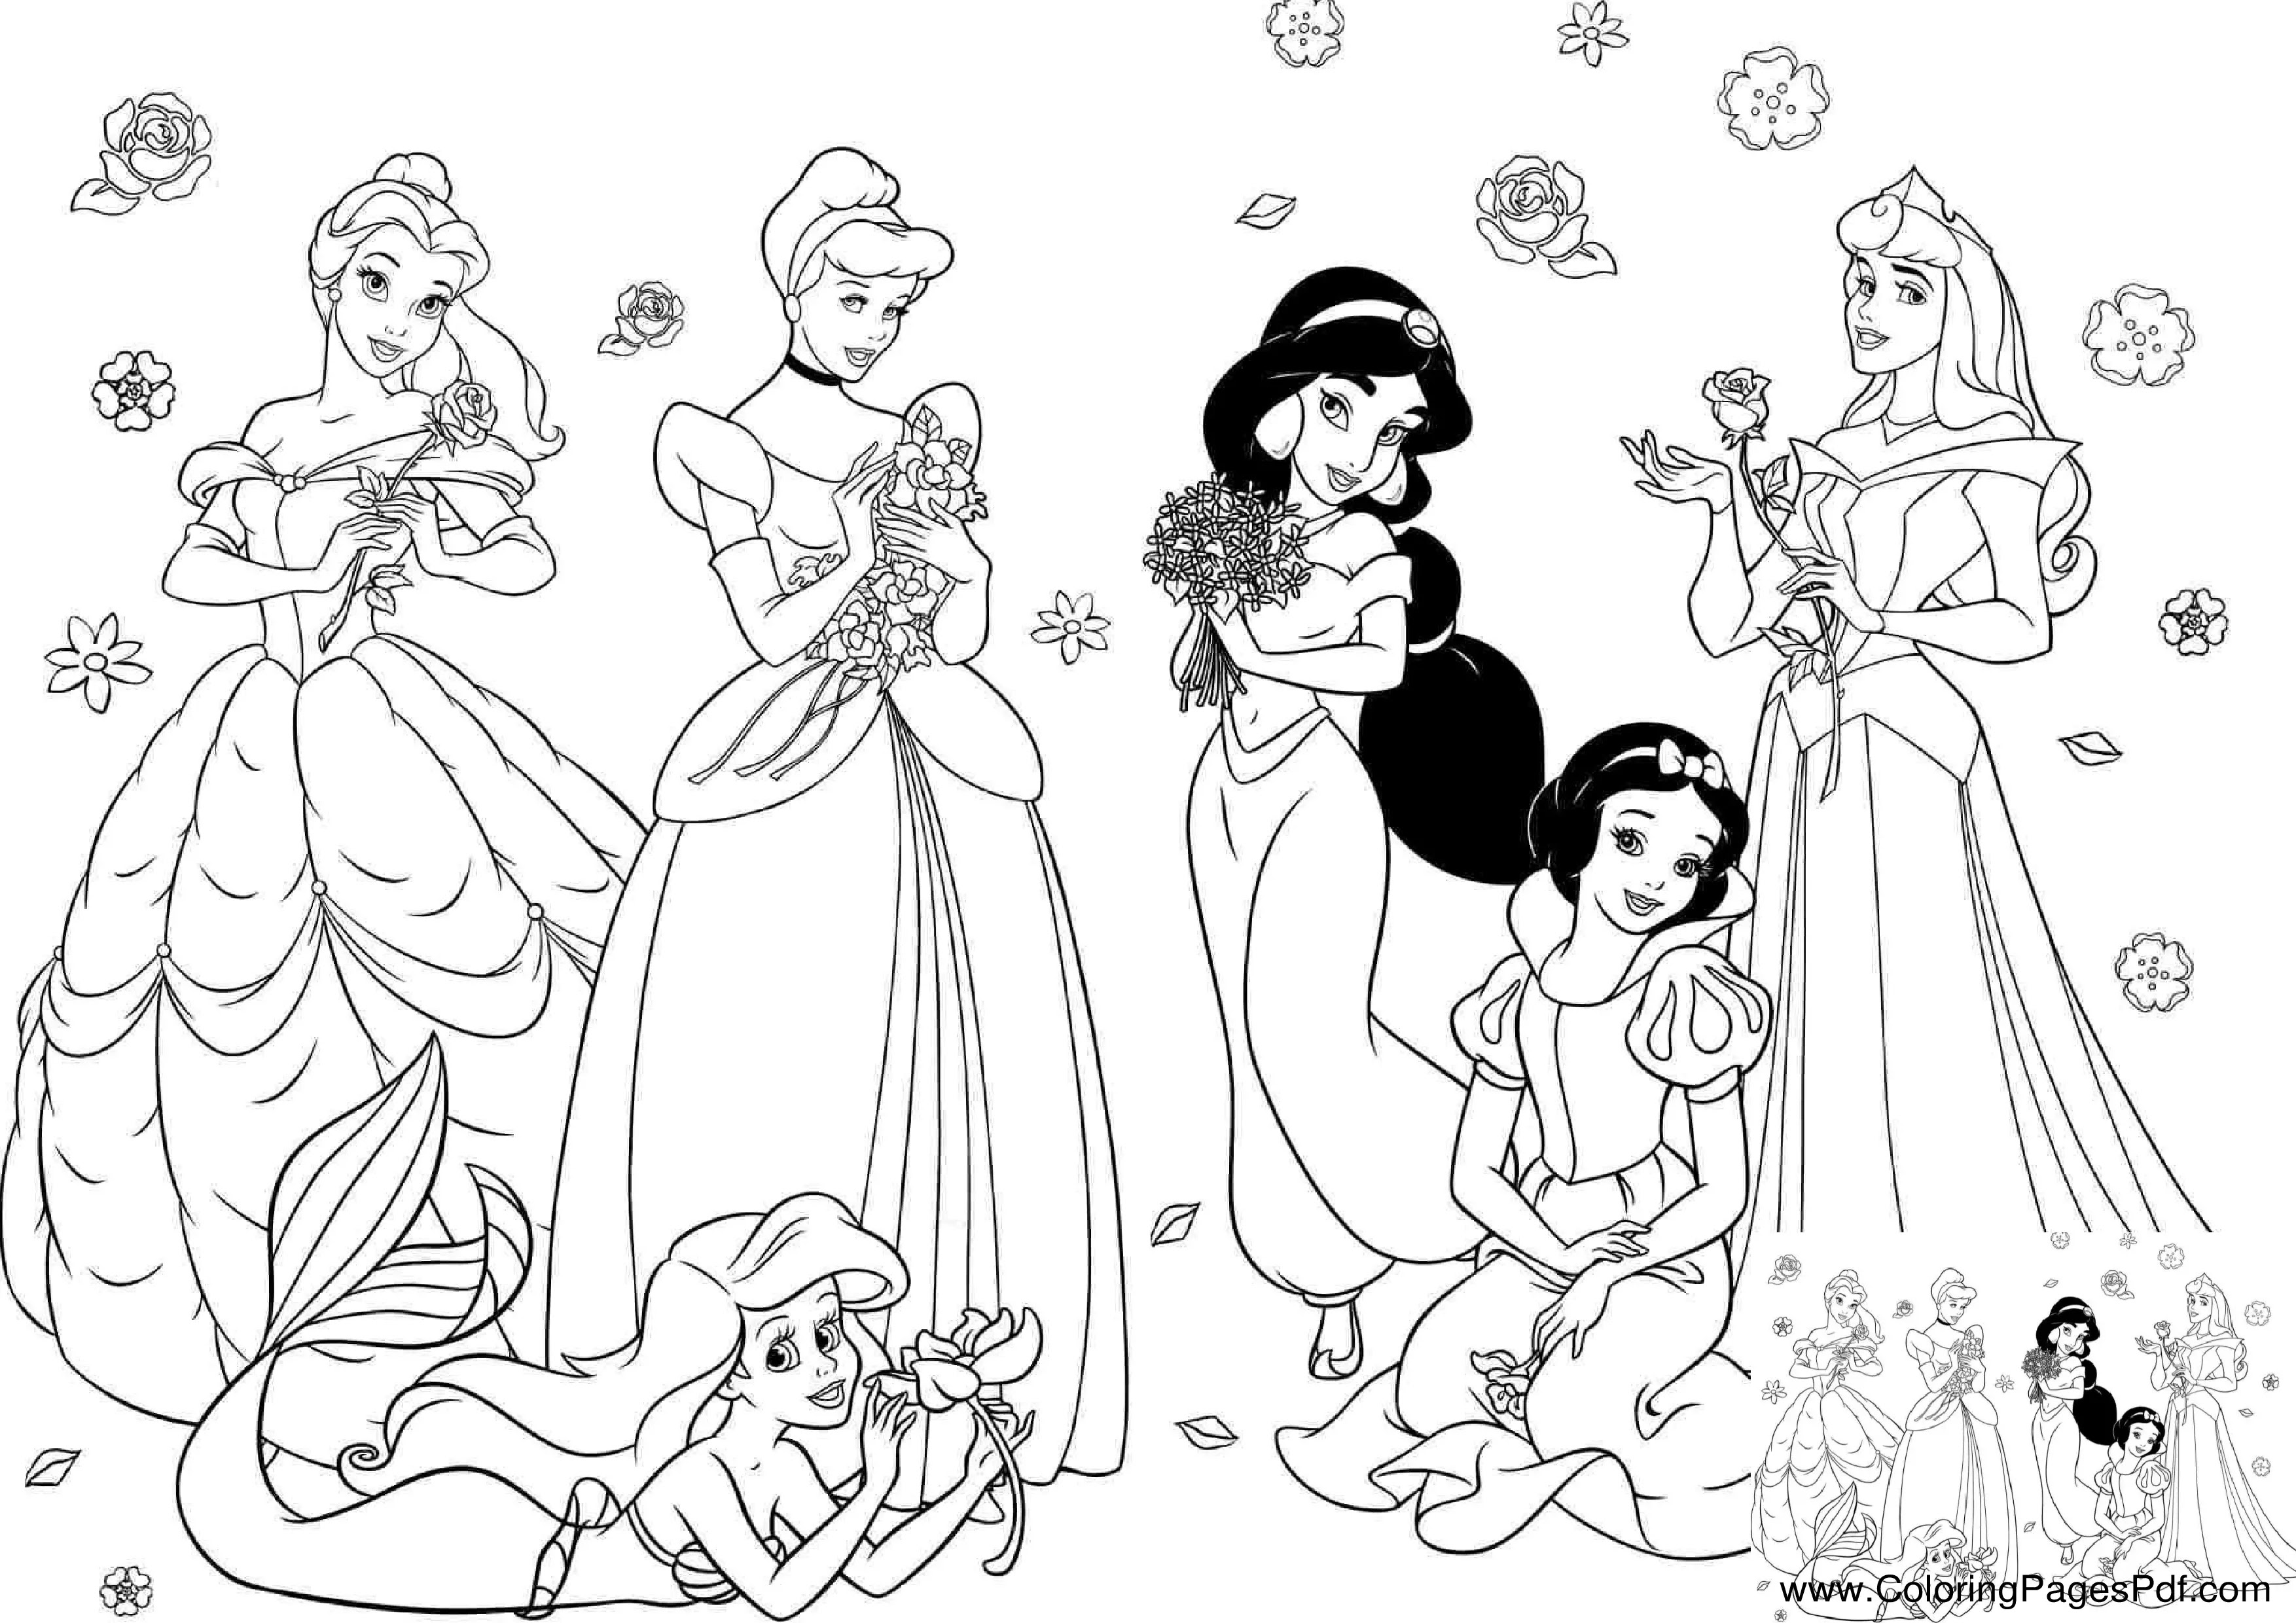 Coloring pages for kids princess